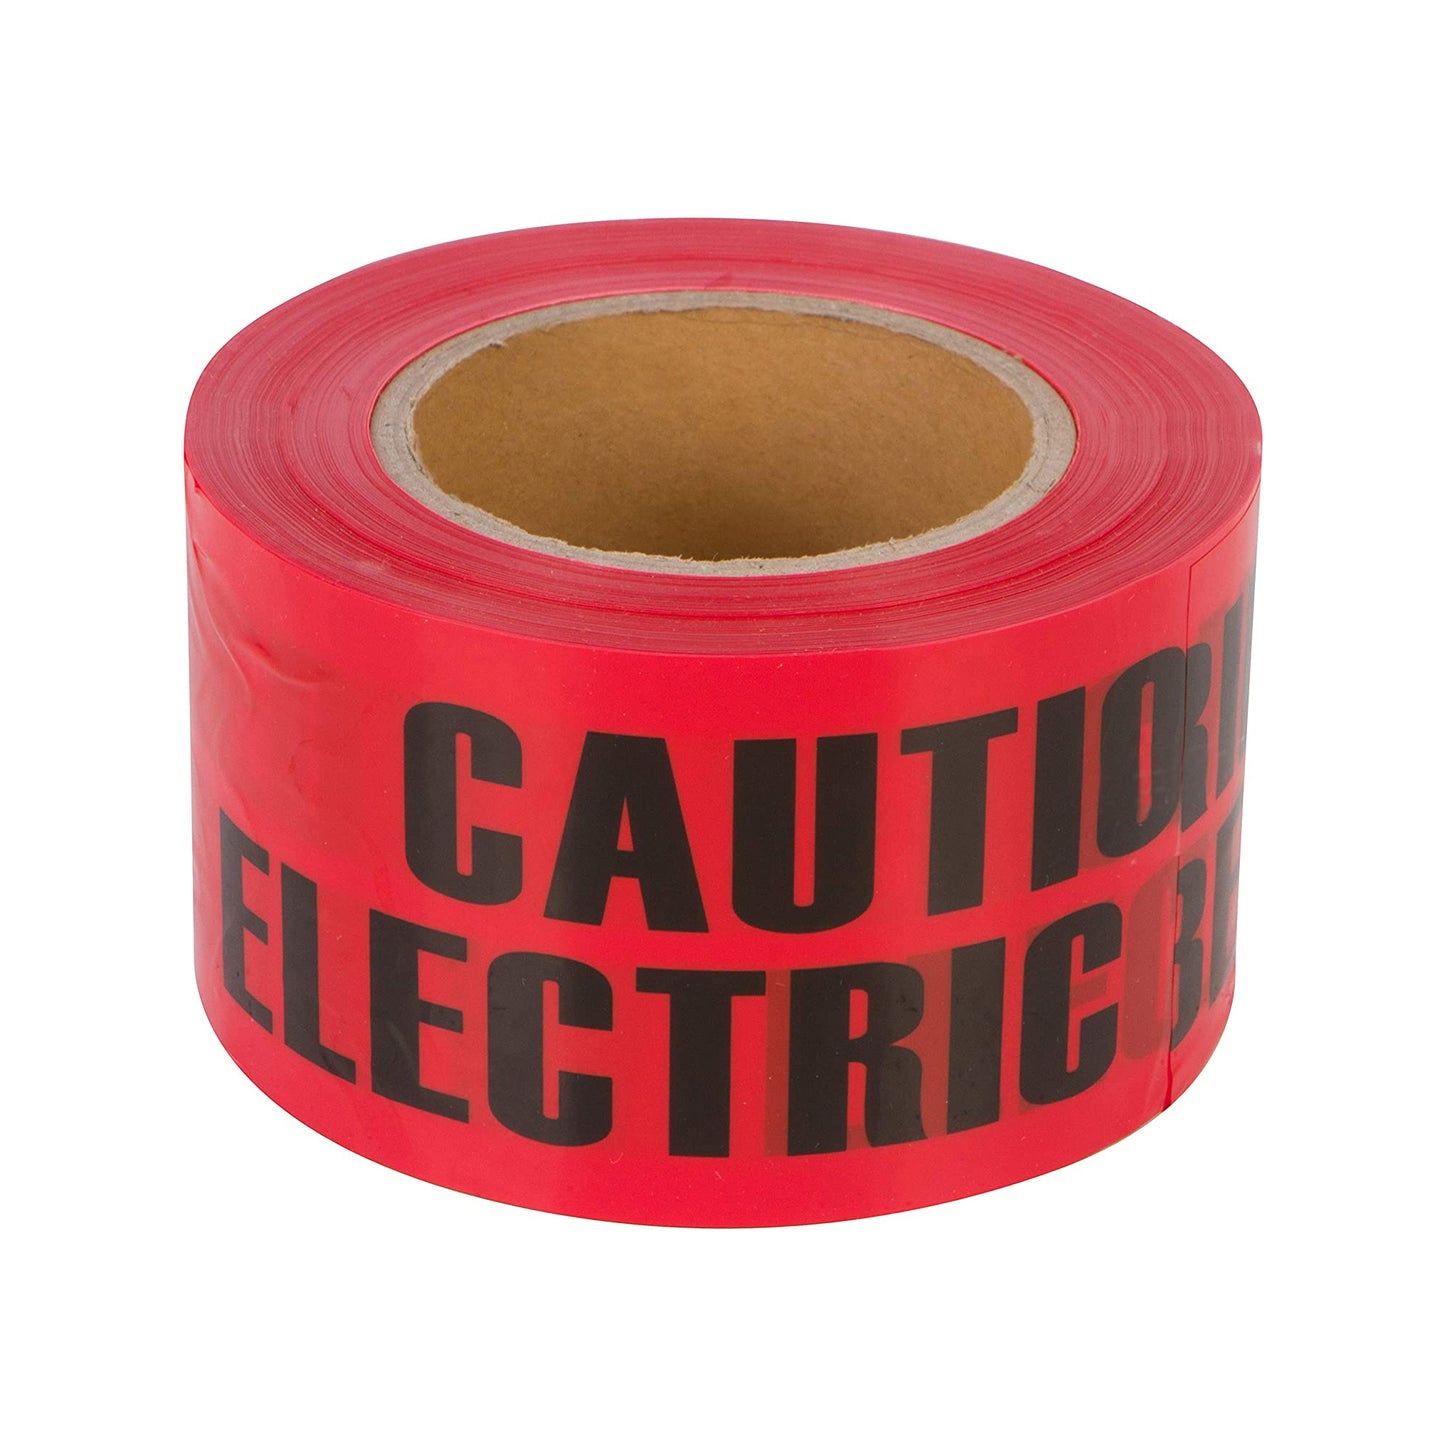 Christy's 6" Wide Non-Detectable Underground Marking Tape - Caution Electric Line Buried Below